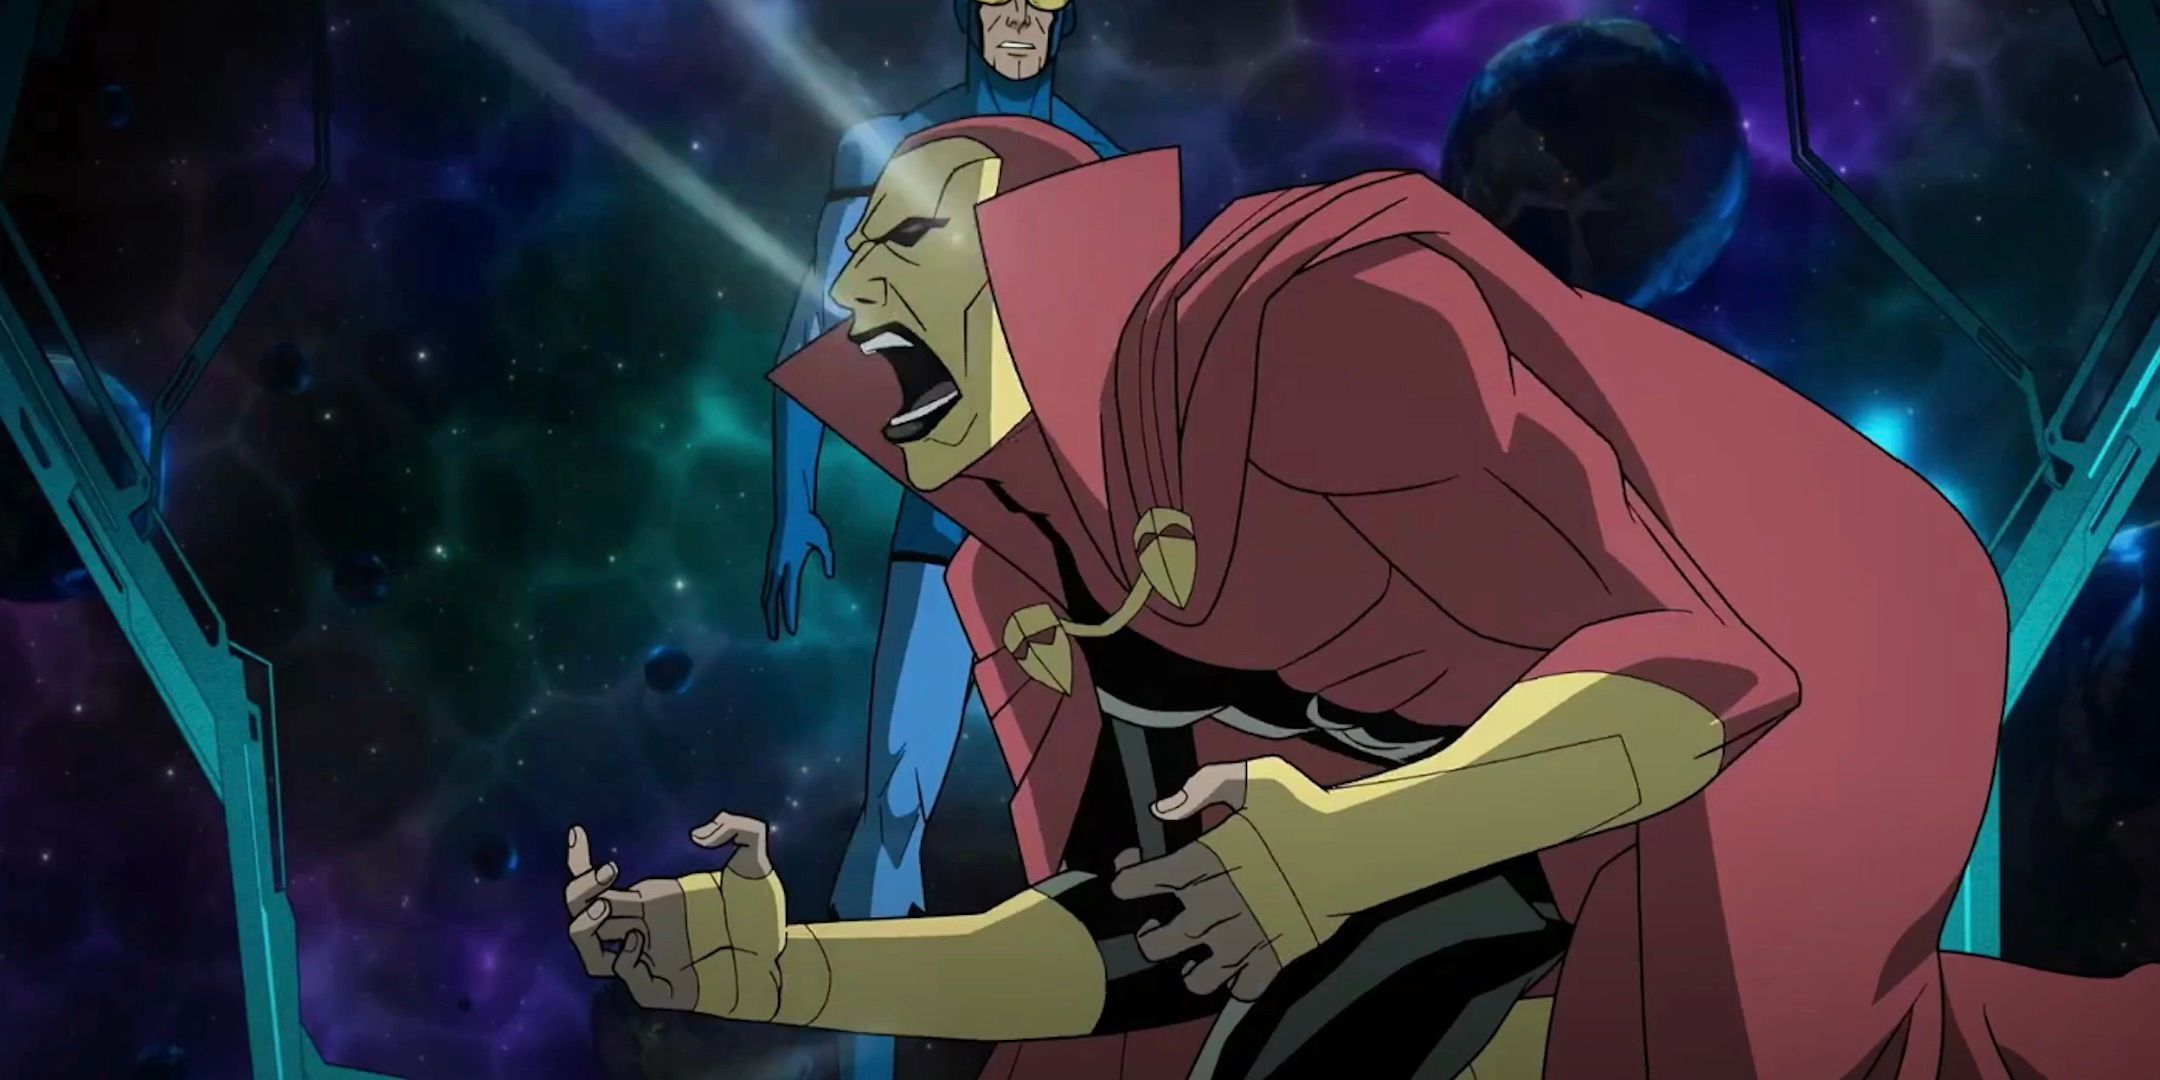 Psycho Pirate yells in front of Blue Beetle in Crisis on Infinite Earths 2